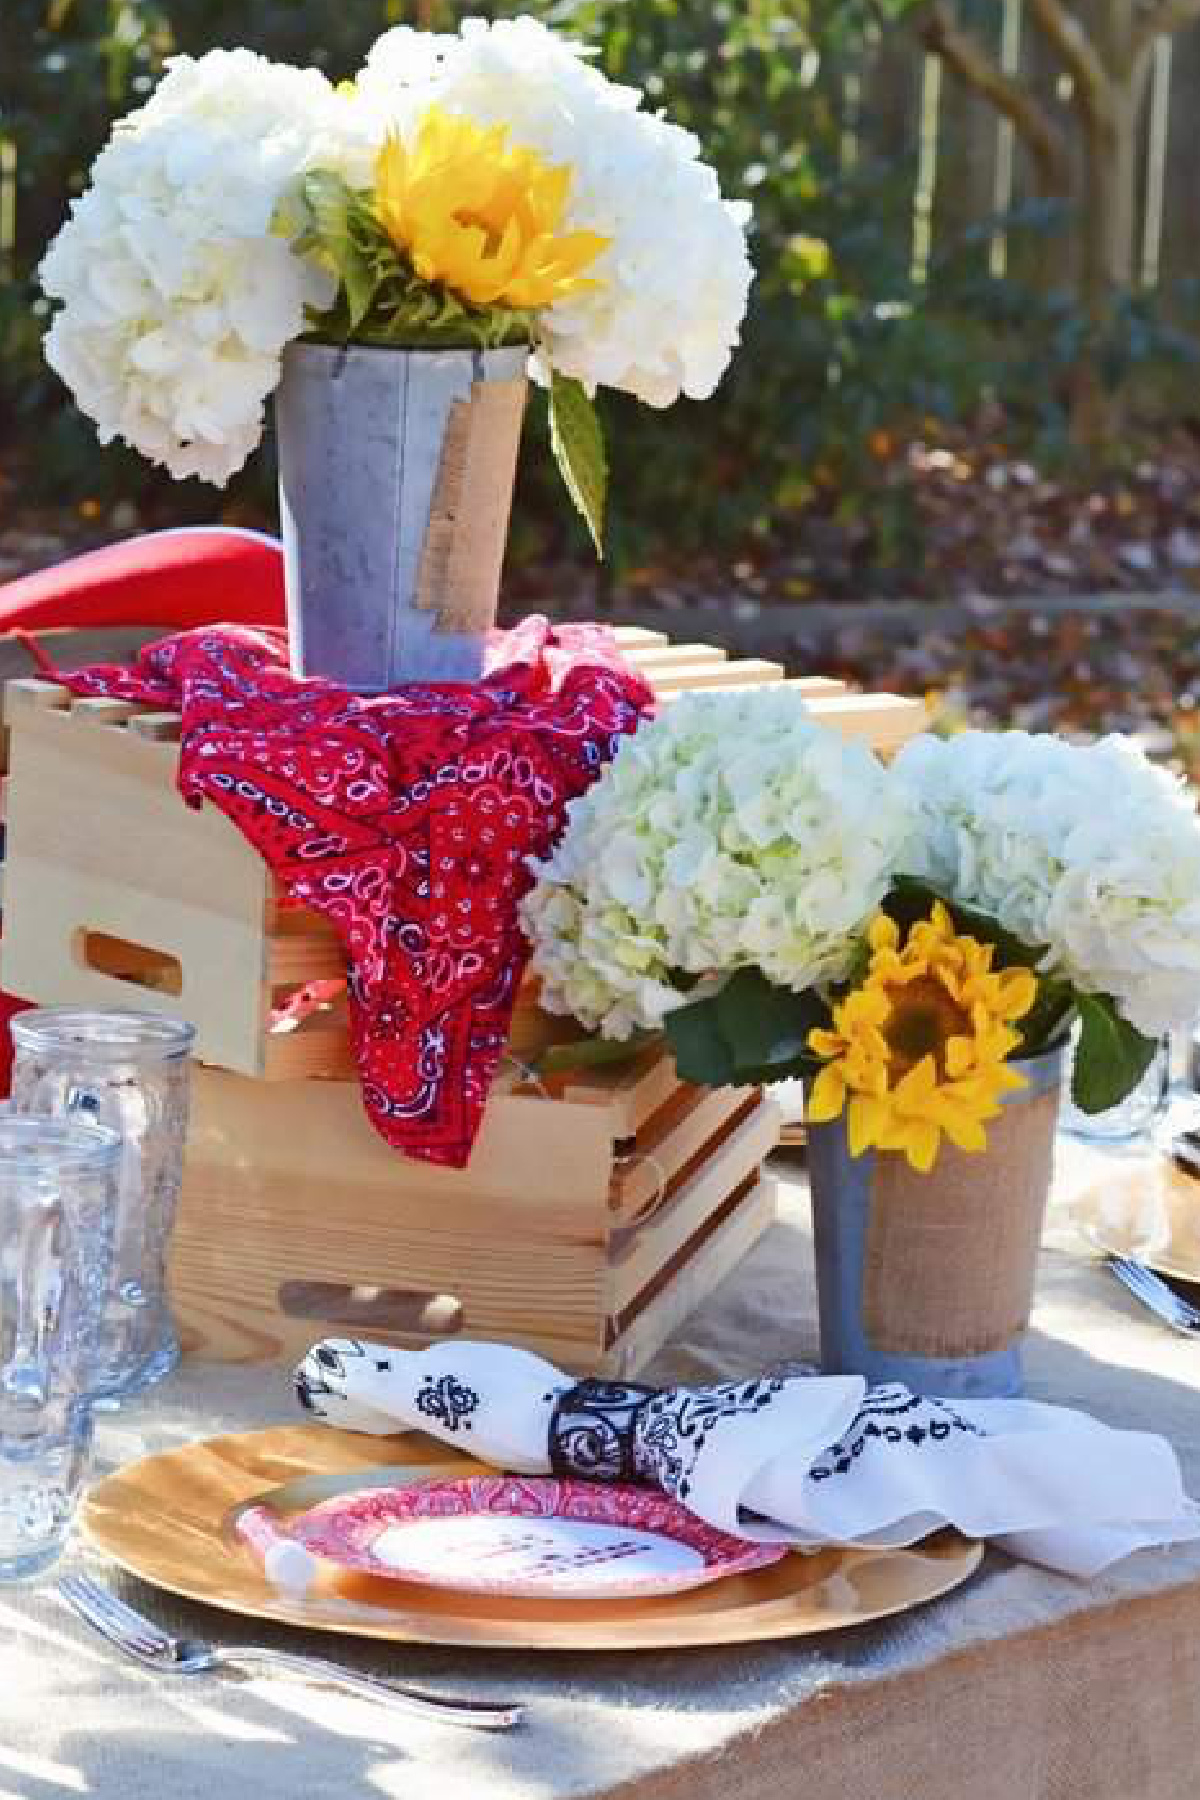 Best Party Themes for Adults  - Rodeo Cowboy Parties